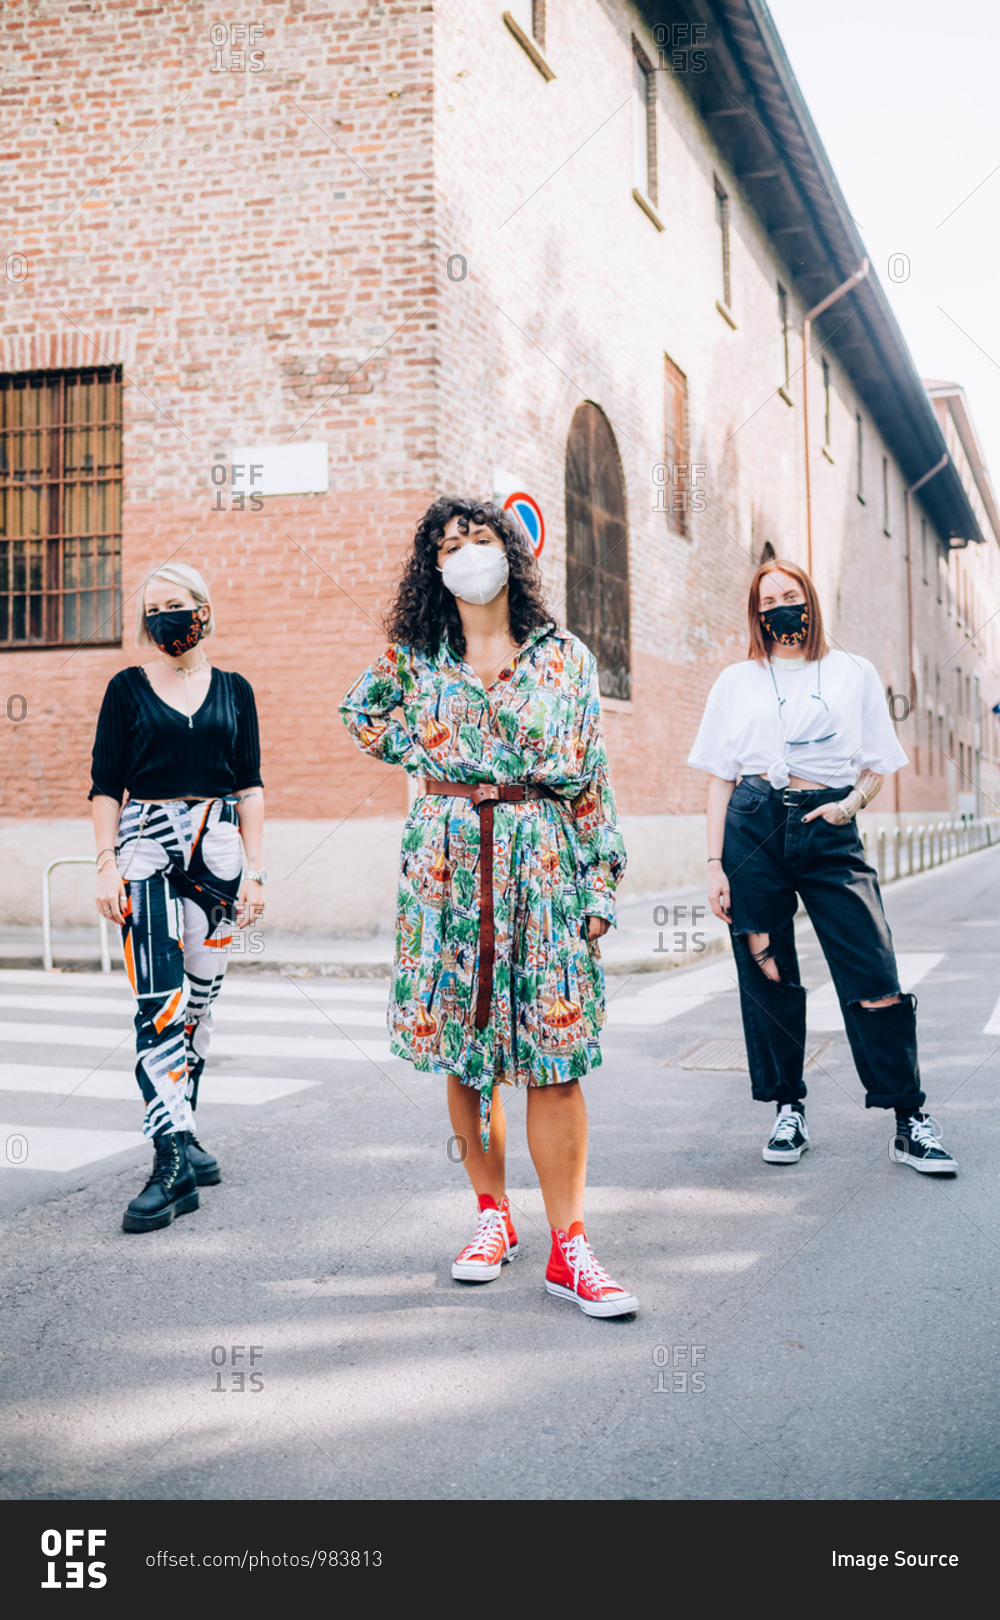 Three young women wearing face masks during Corona virus, standing on a pedestrian crossing in a street.